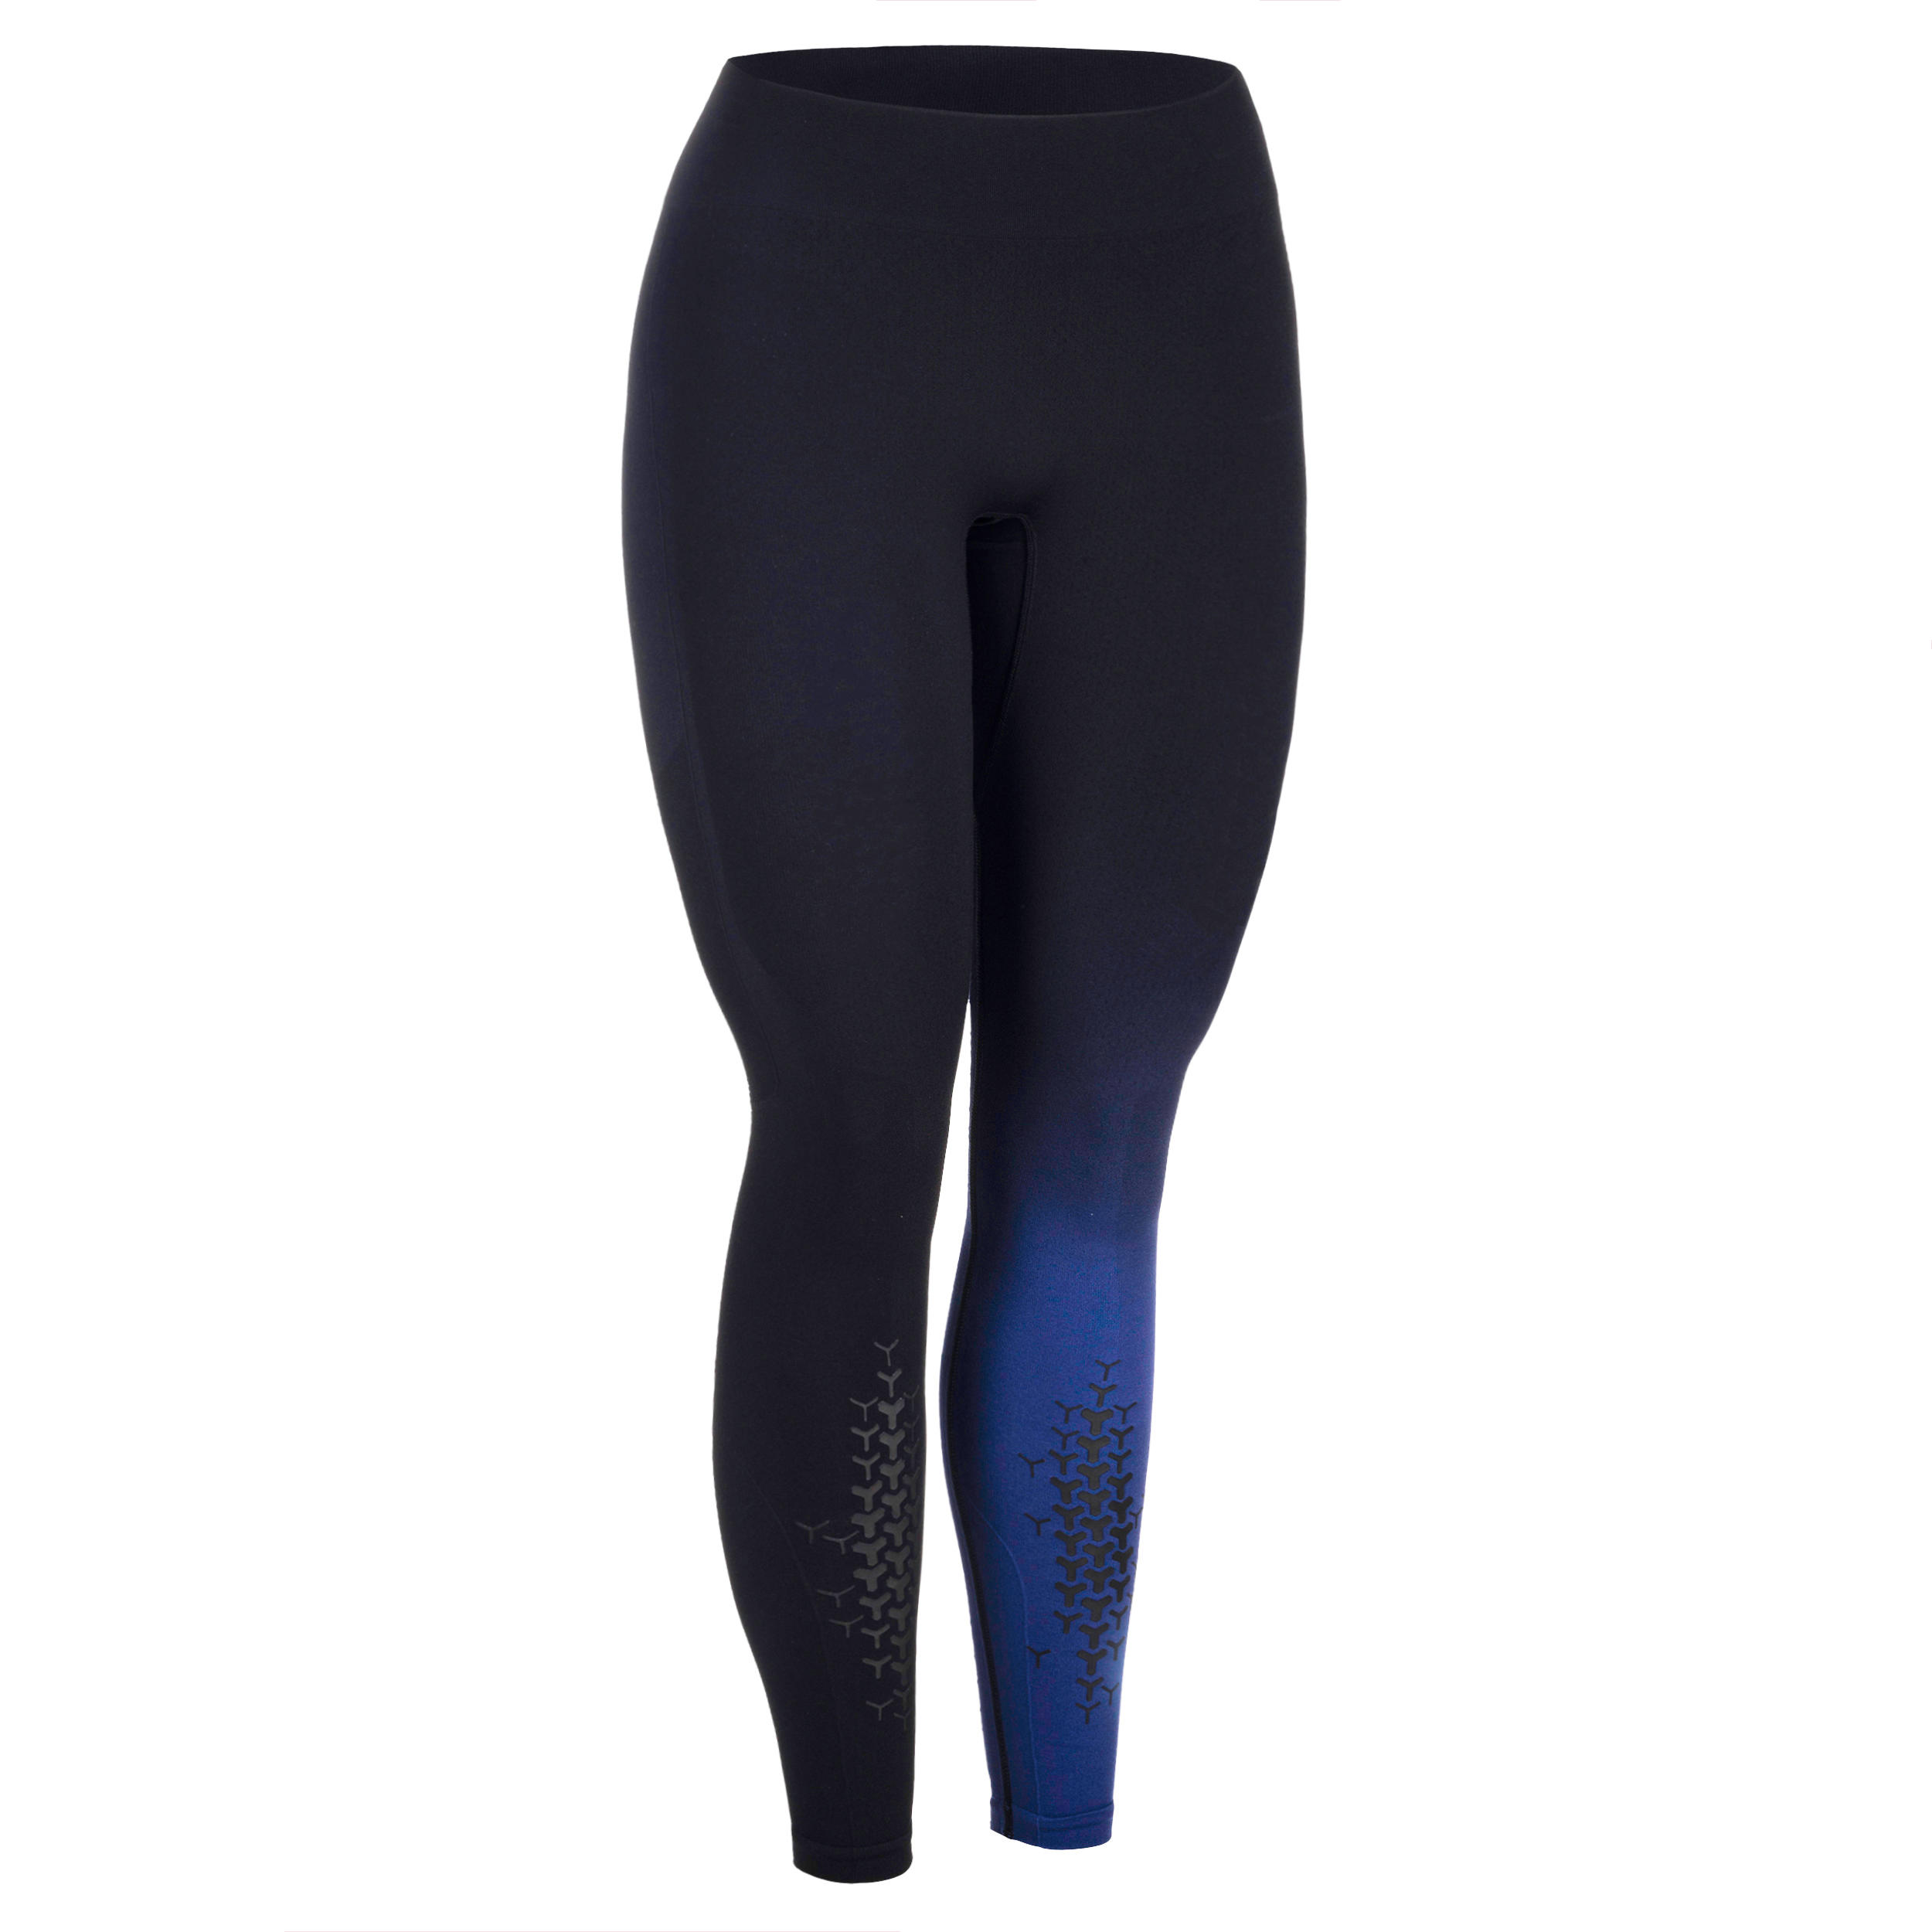 Can Workout Tights Help Me Lose Weight?